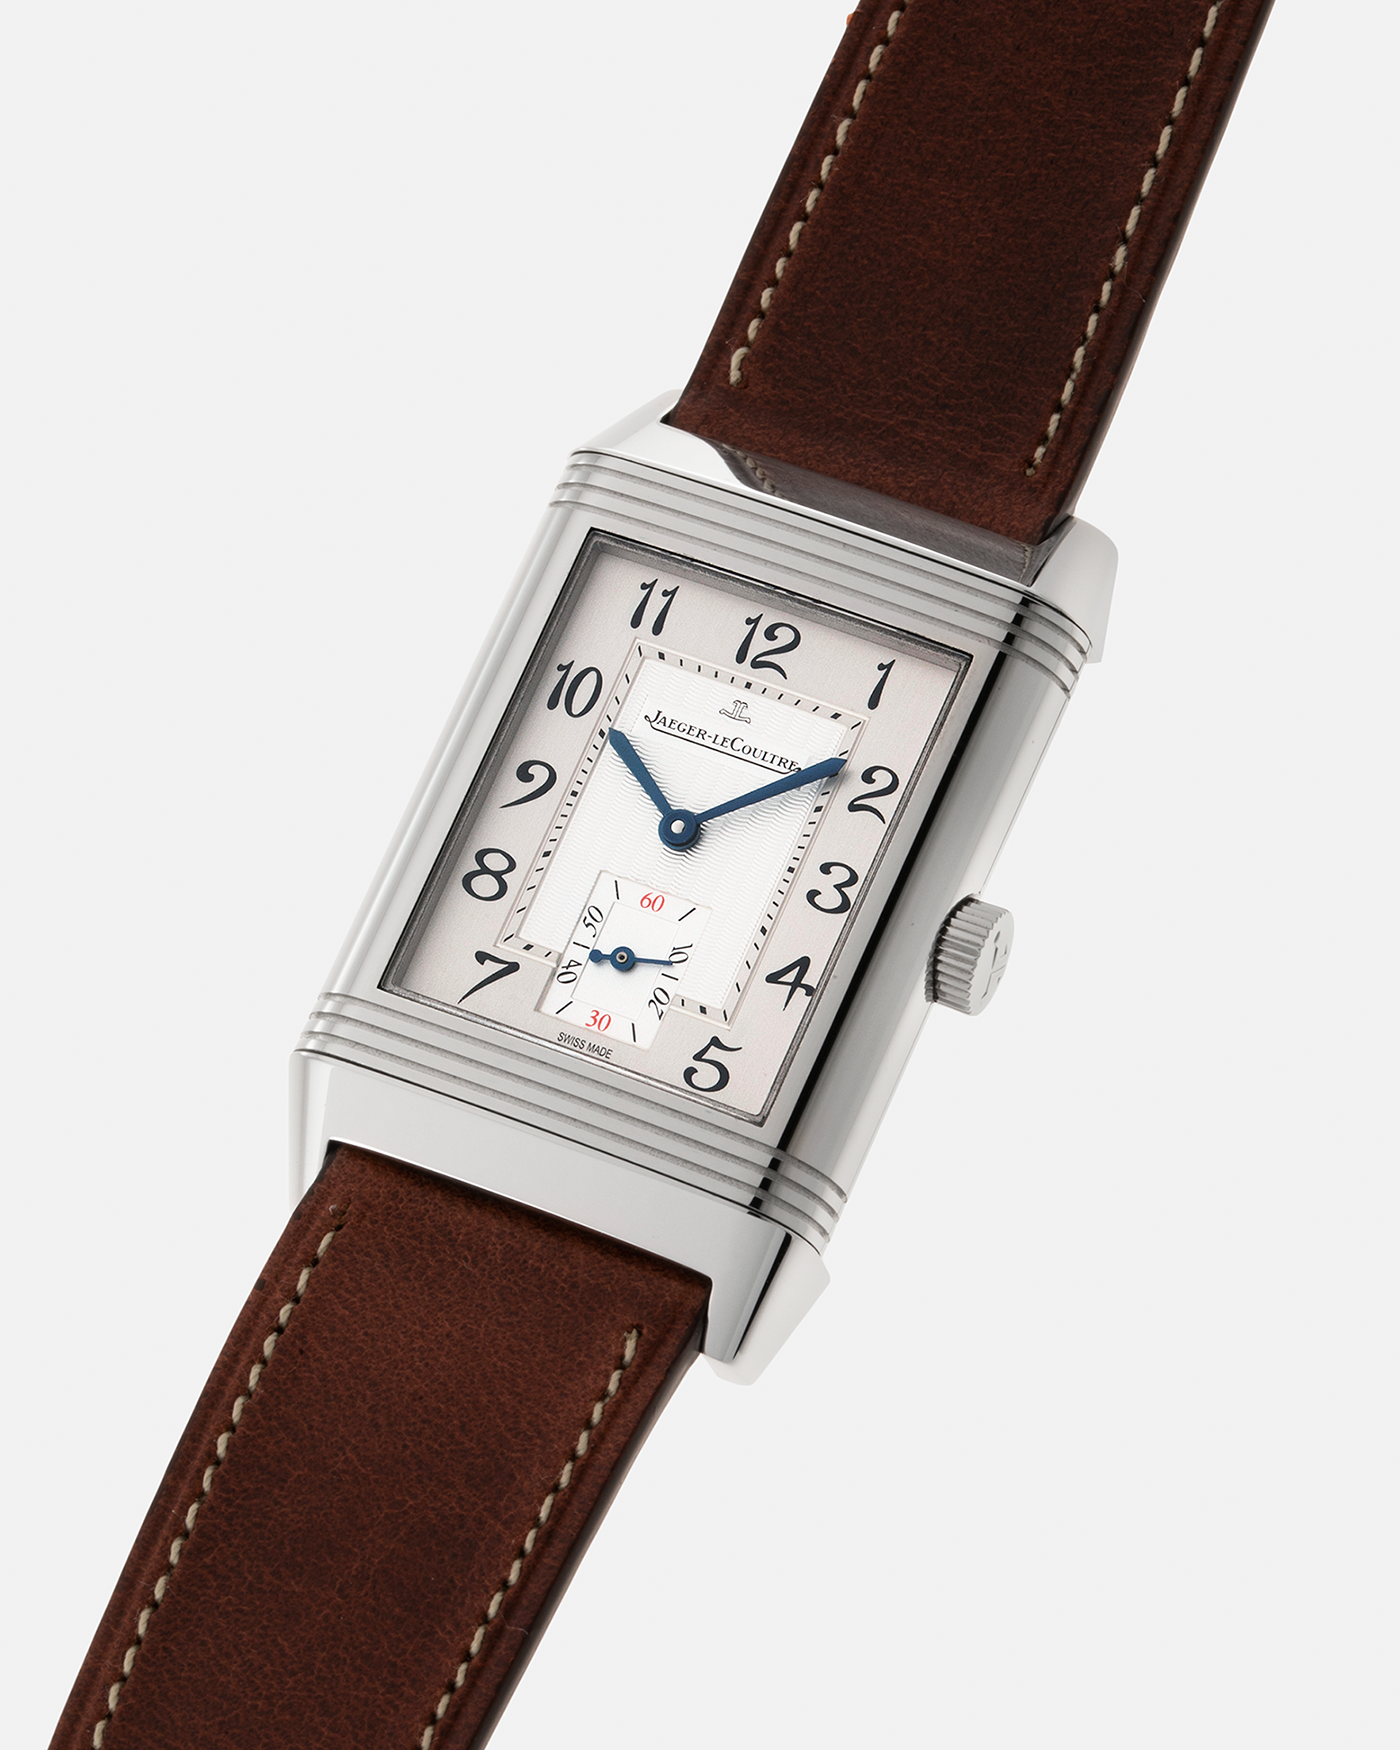 Brand: Jaeger LeCoultre Year: 2012 Model: Q2708413, Limited Edition of 50 pieces Reference Number: 270.8.62 Material: Stainless Steel Movement: JLC Cal. 822, Manual-Wind Case Diameter: 46mm (with lugs) x 26mm Strap: Nostime Brown Leather Strap with Signed Stainless Steel Deployant Clasp